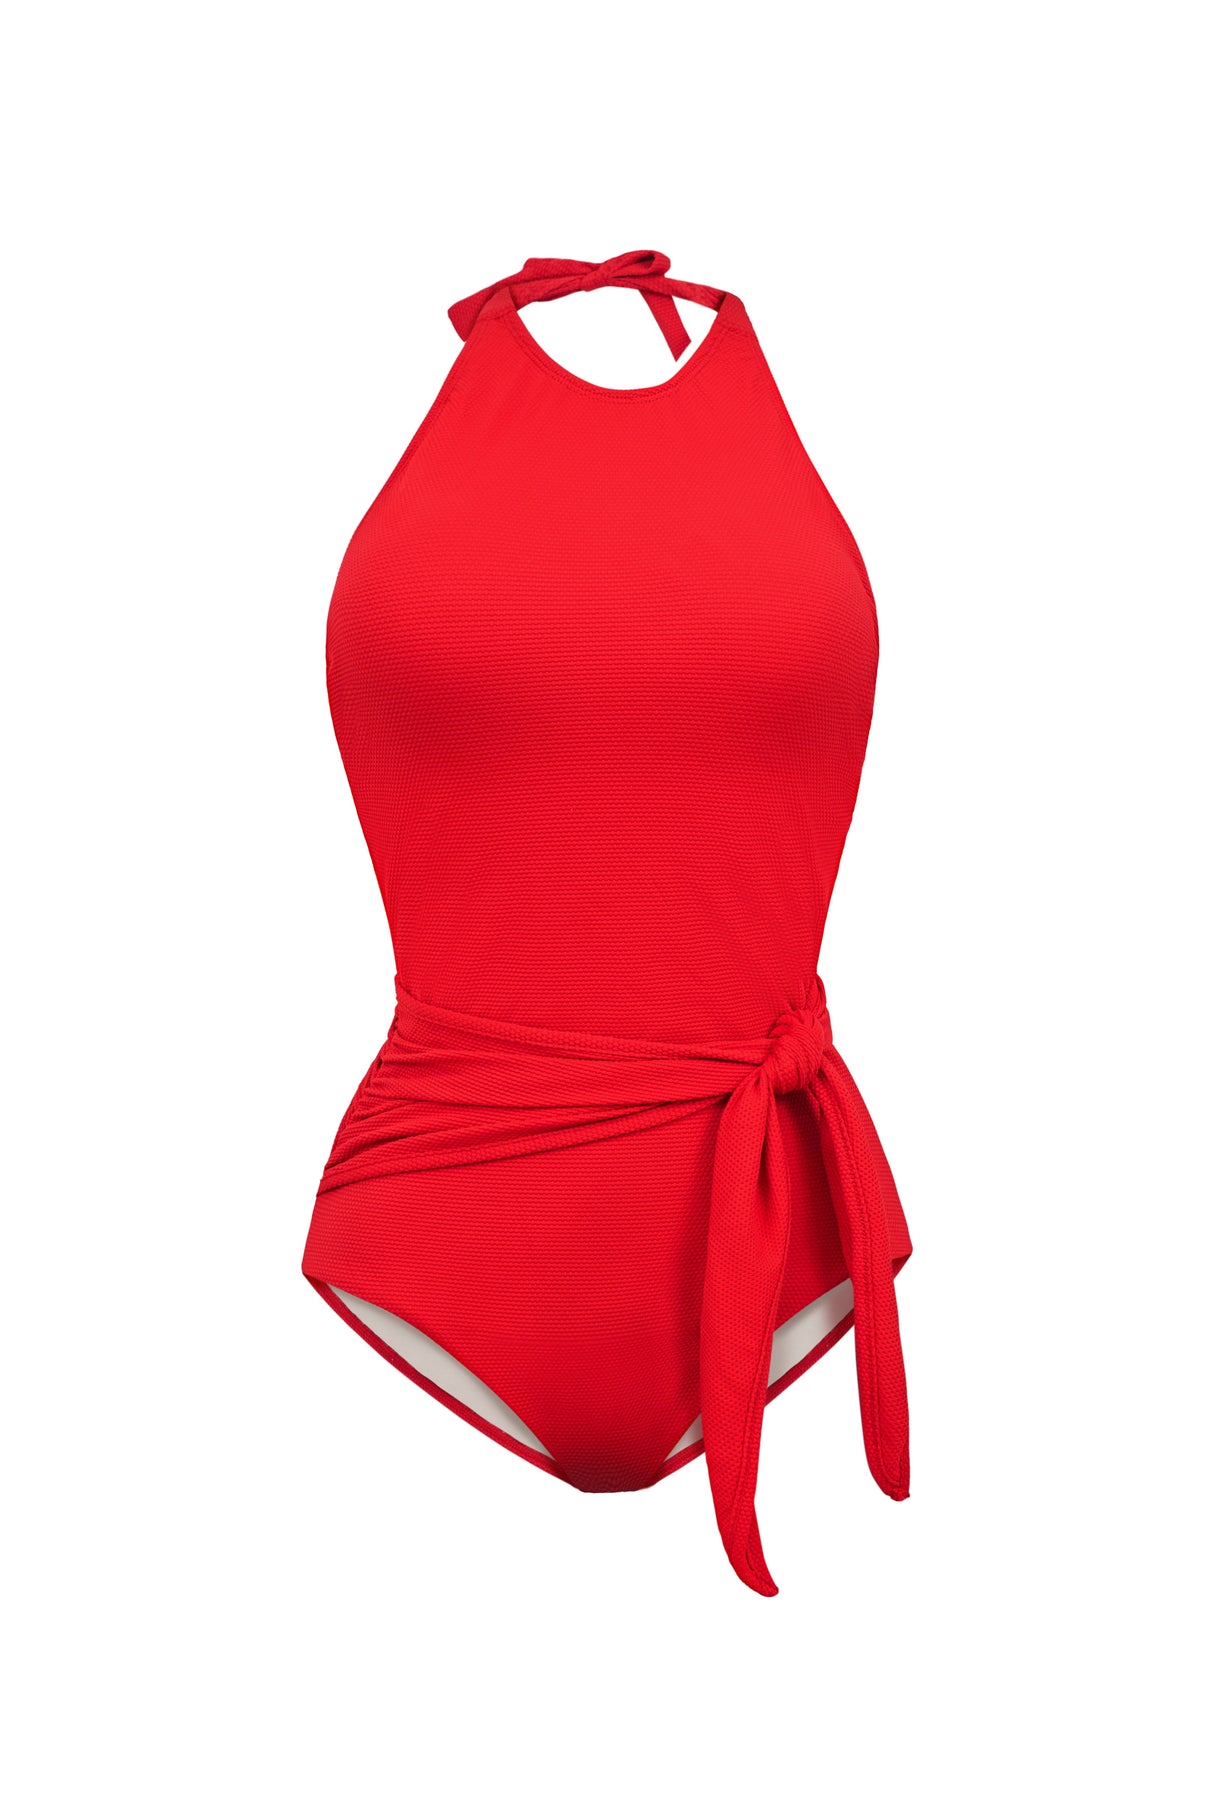 Genevieve One-Piece Swimsuit, Chili Pepper Red – Stage